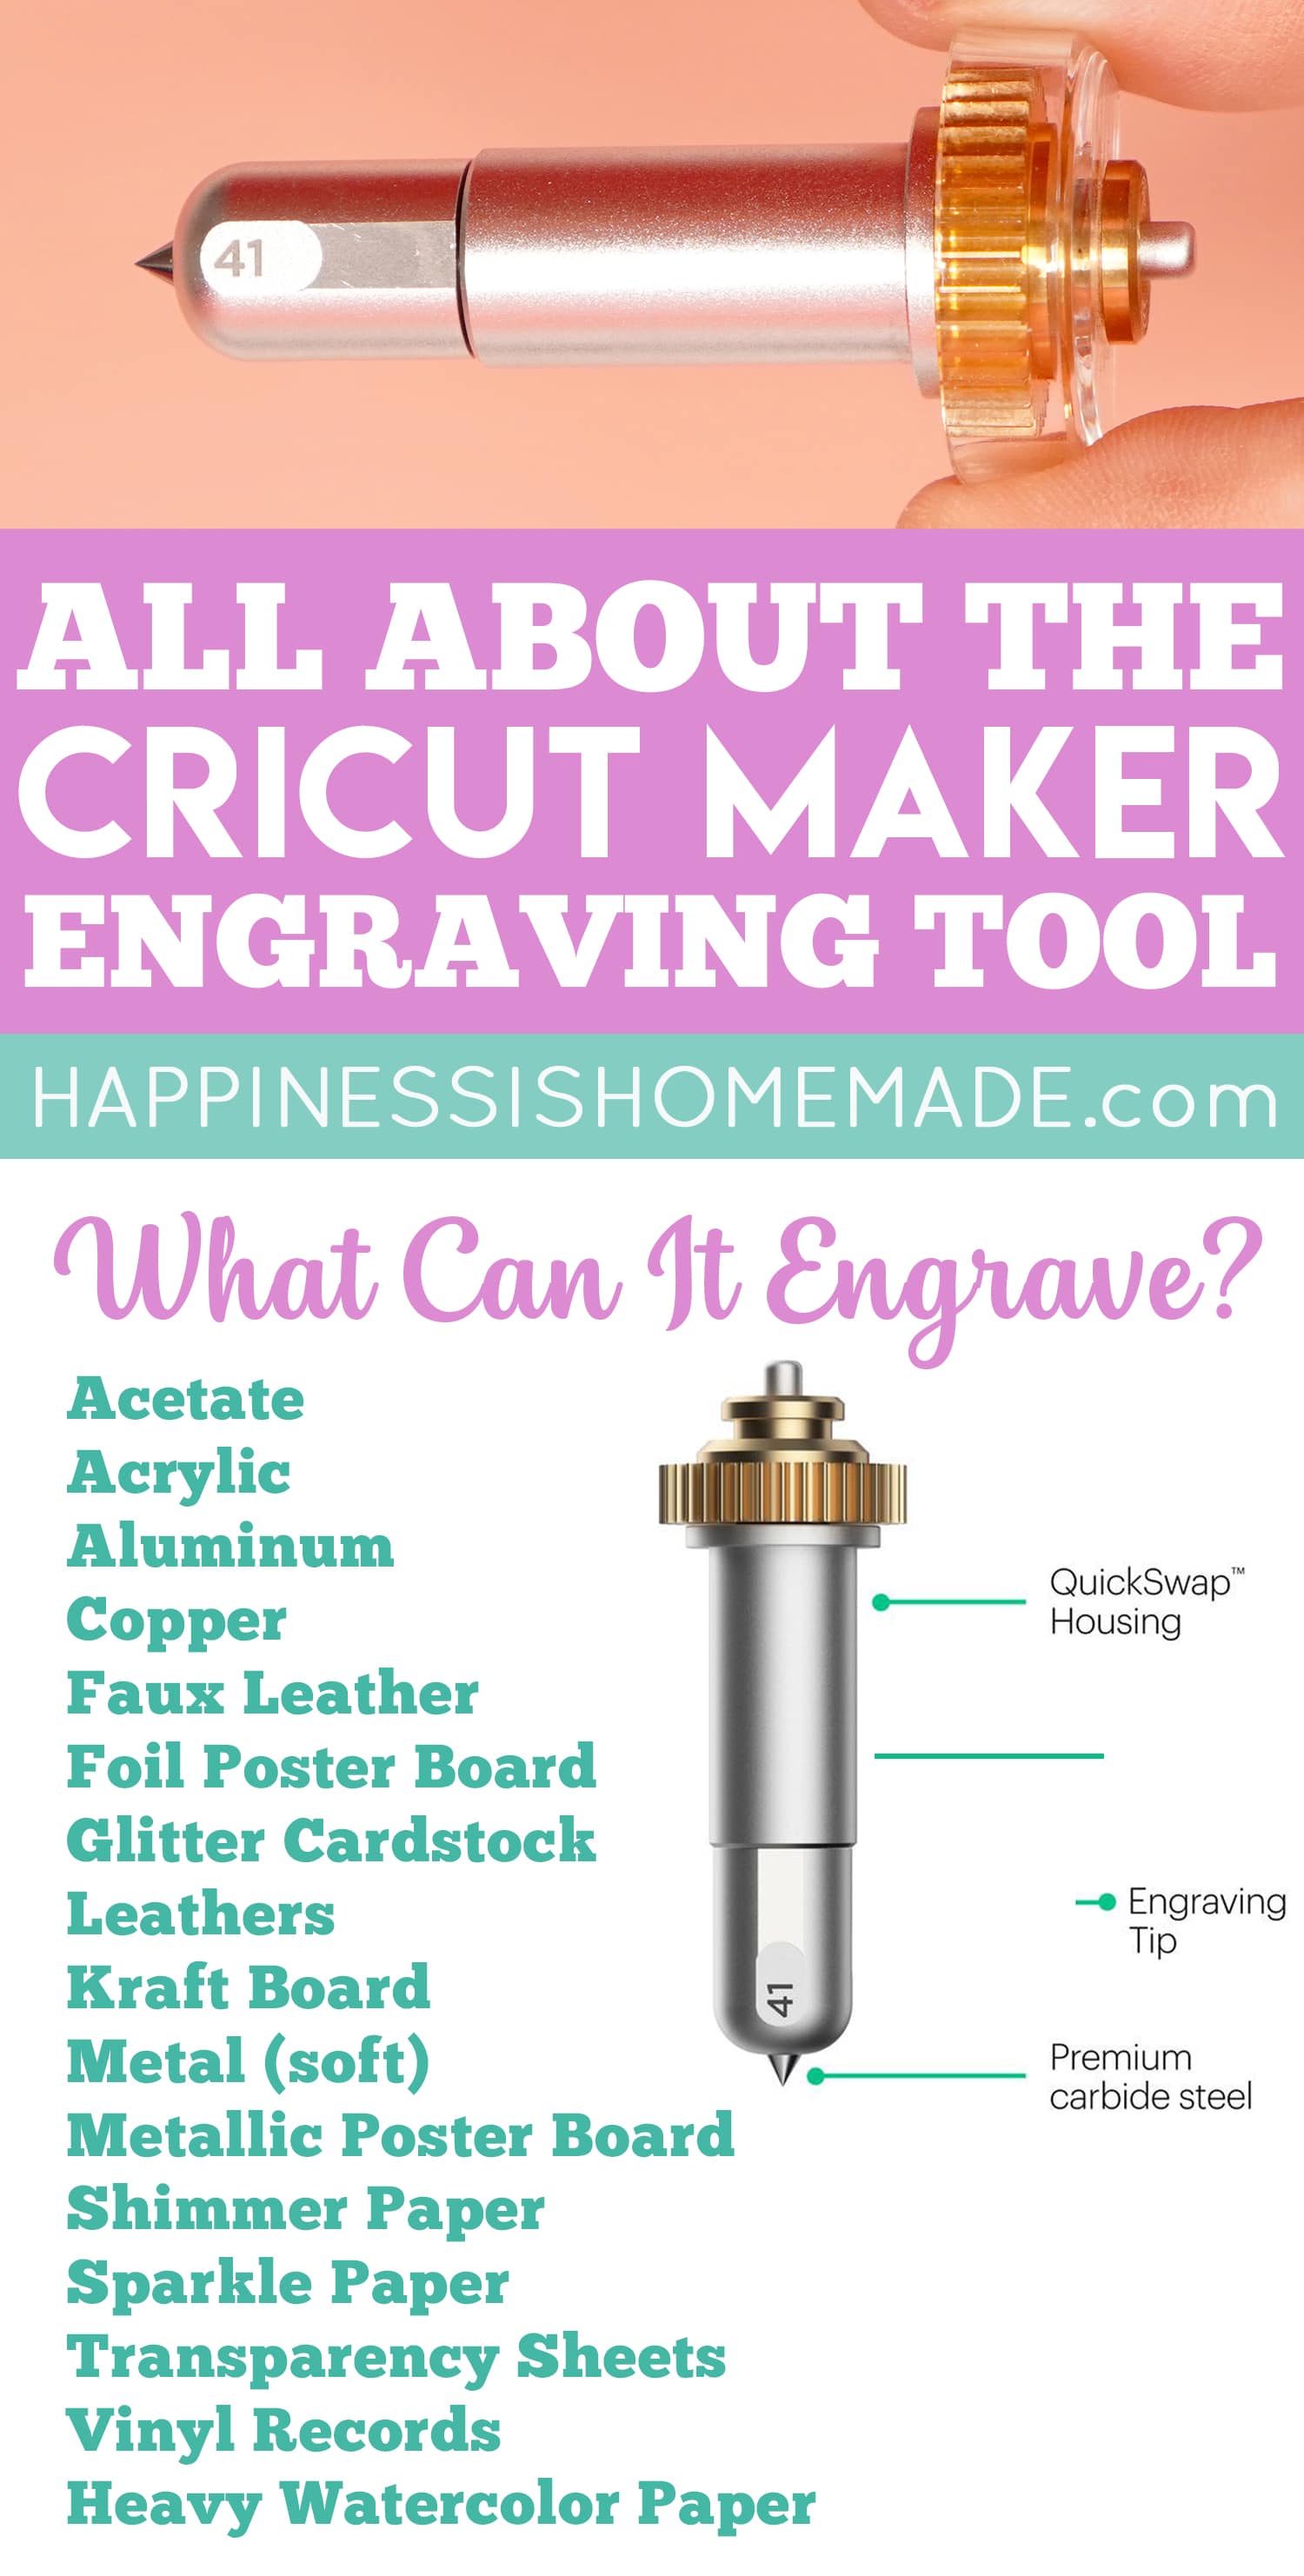 Here's how to engrave with your Cricut maker! Make sure you have